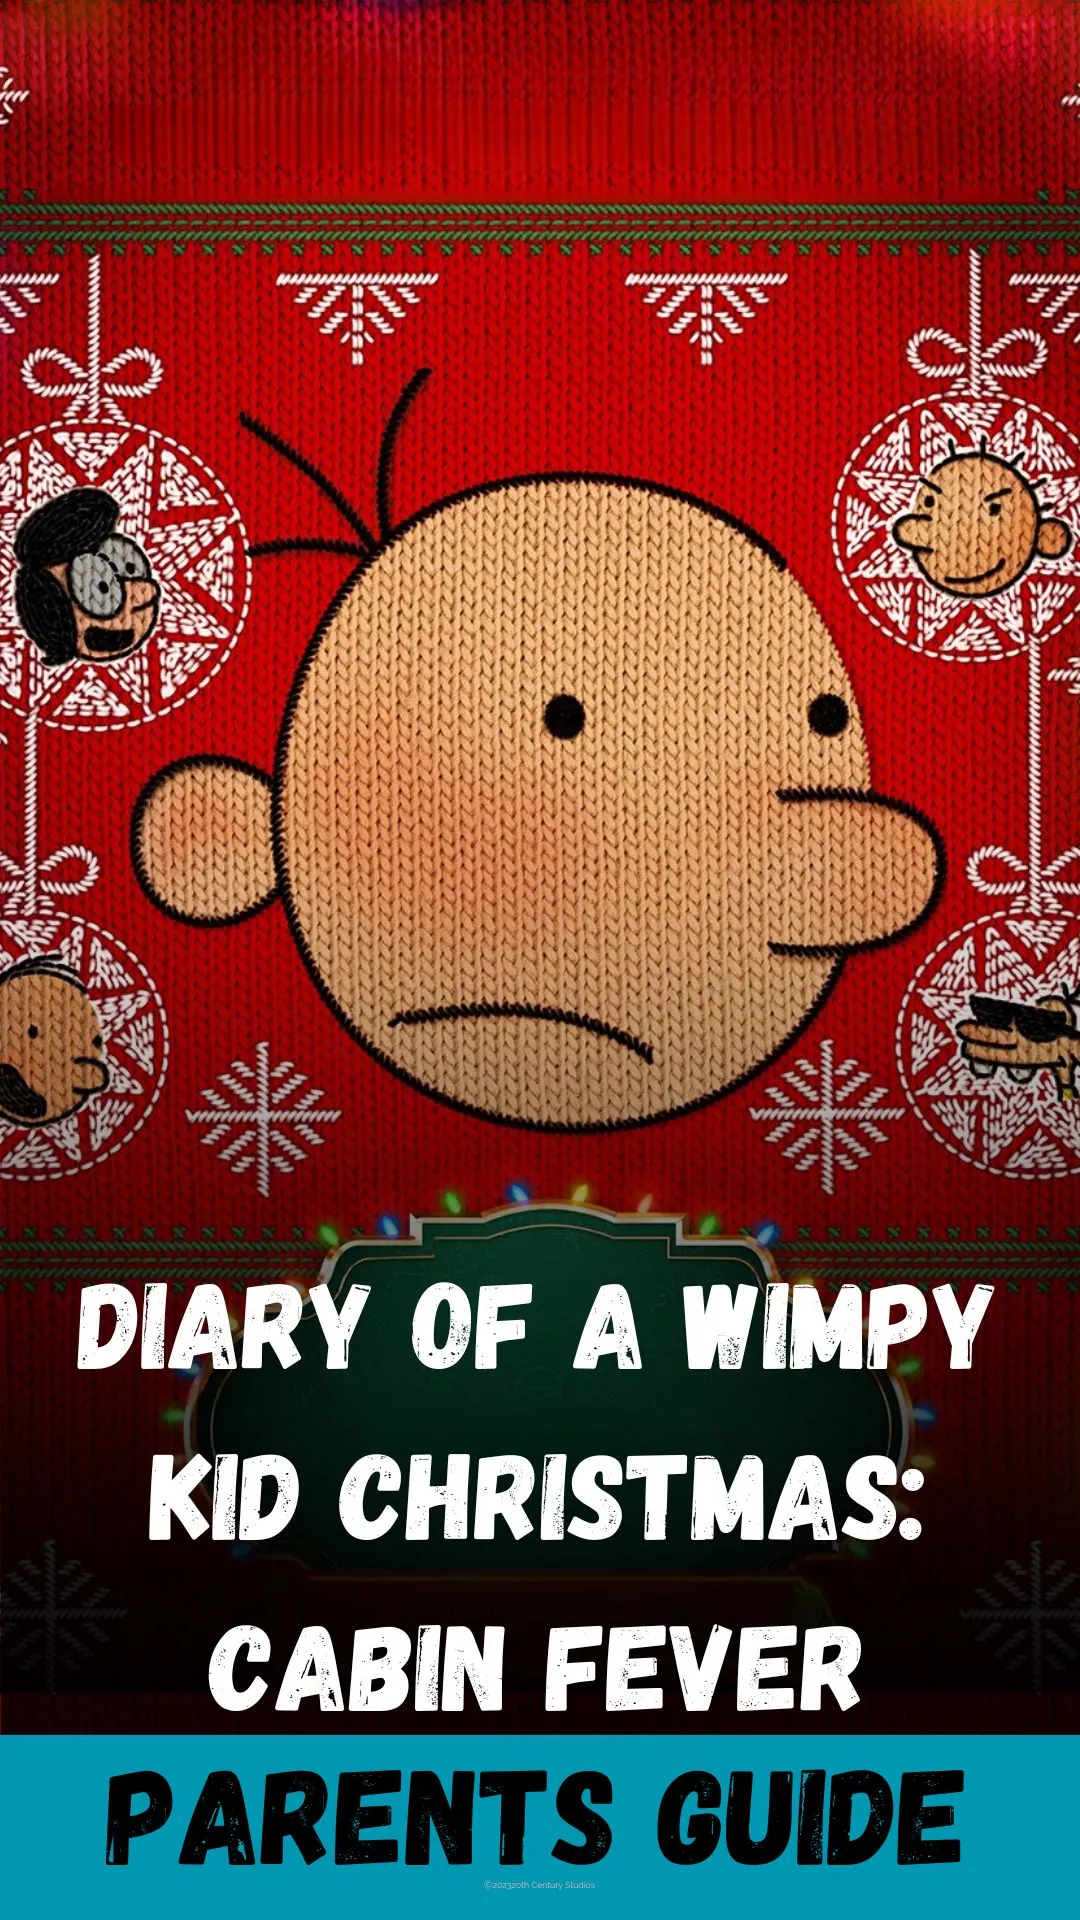 Diary of a Wimpy Kid Christmas Cabin Fever Parents Guide (1)